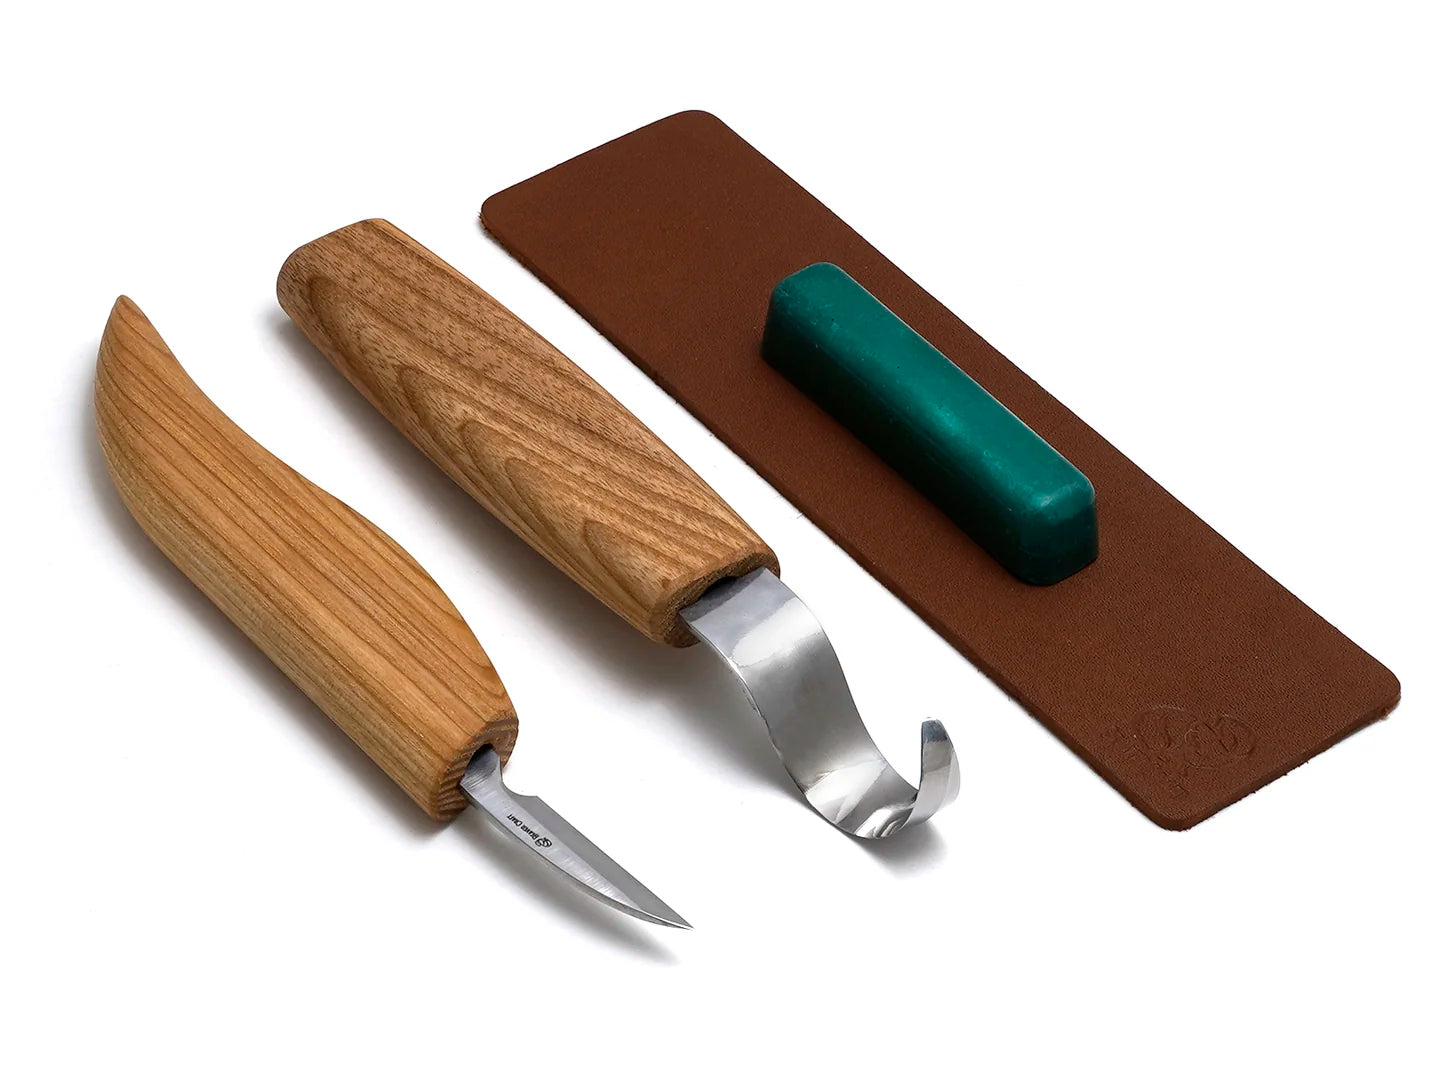 S02L – Spoon Carving Set with Detail Knife (Left-Handed)